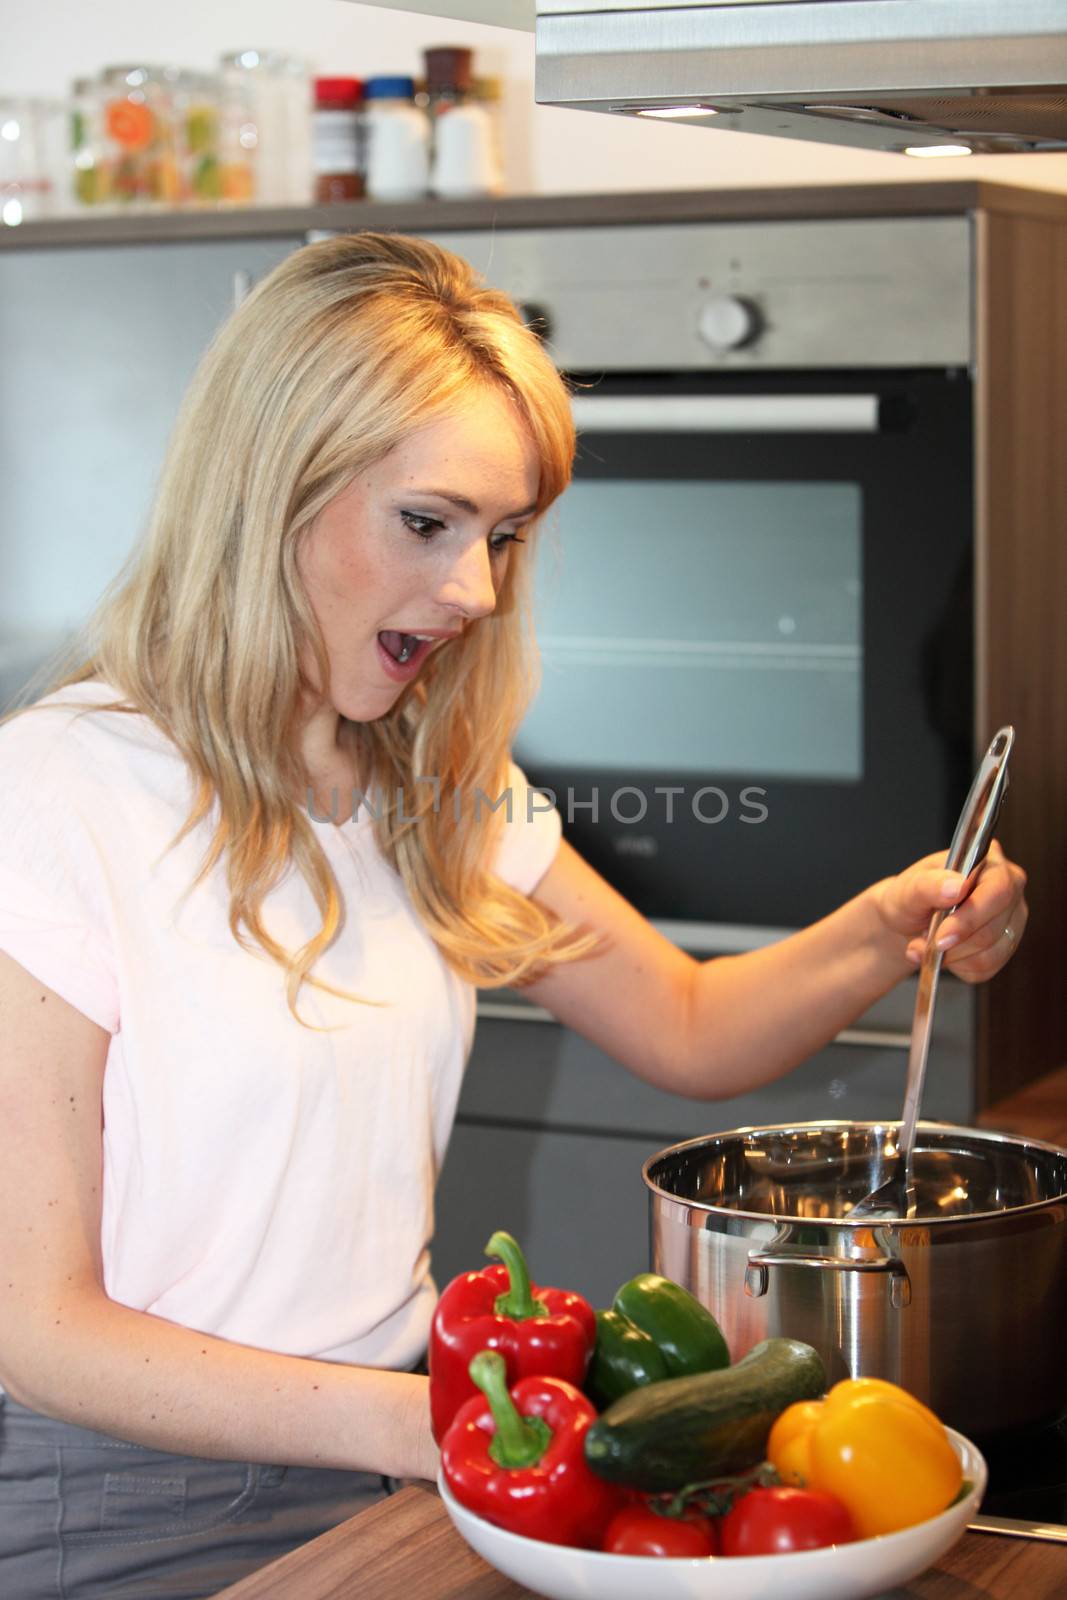 Attractive young blond woman cooking in the kitchen stirring the pot over the stove with a surprised look and a colourful bowl of fresh vegetables in the foreground